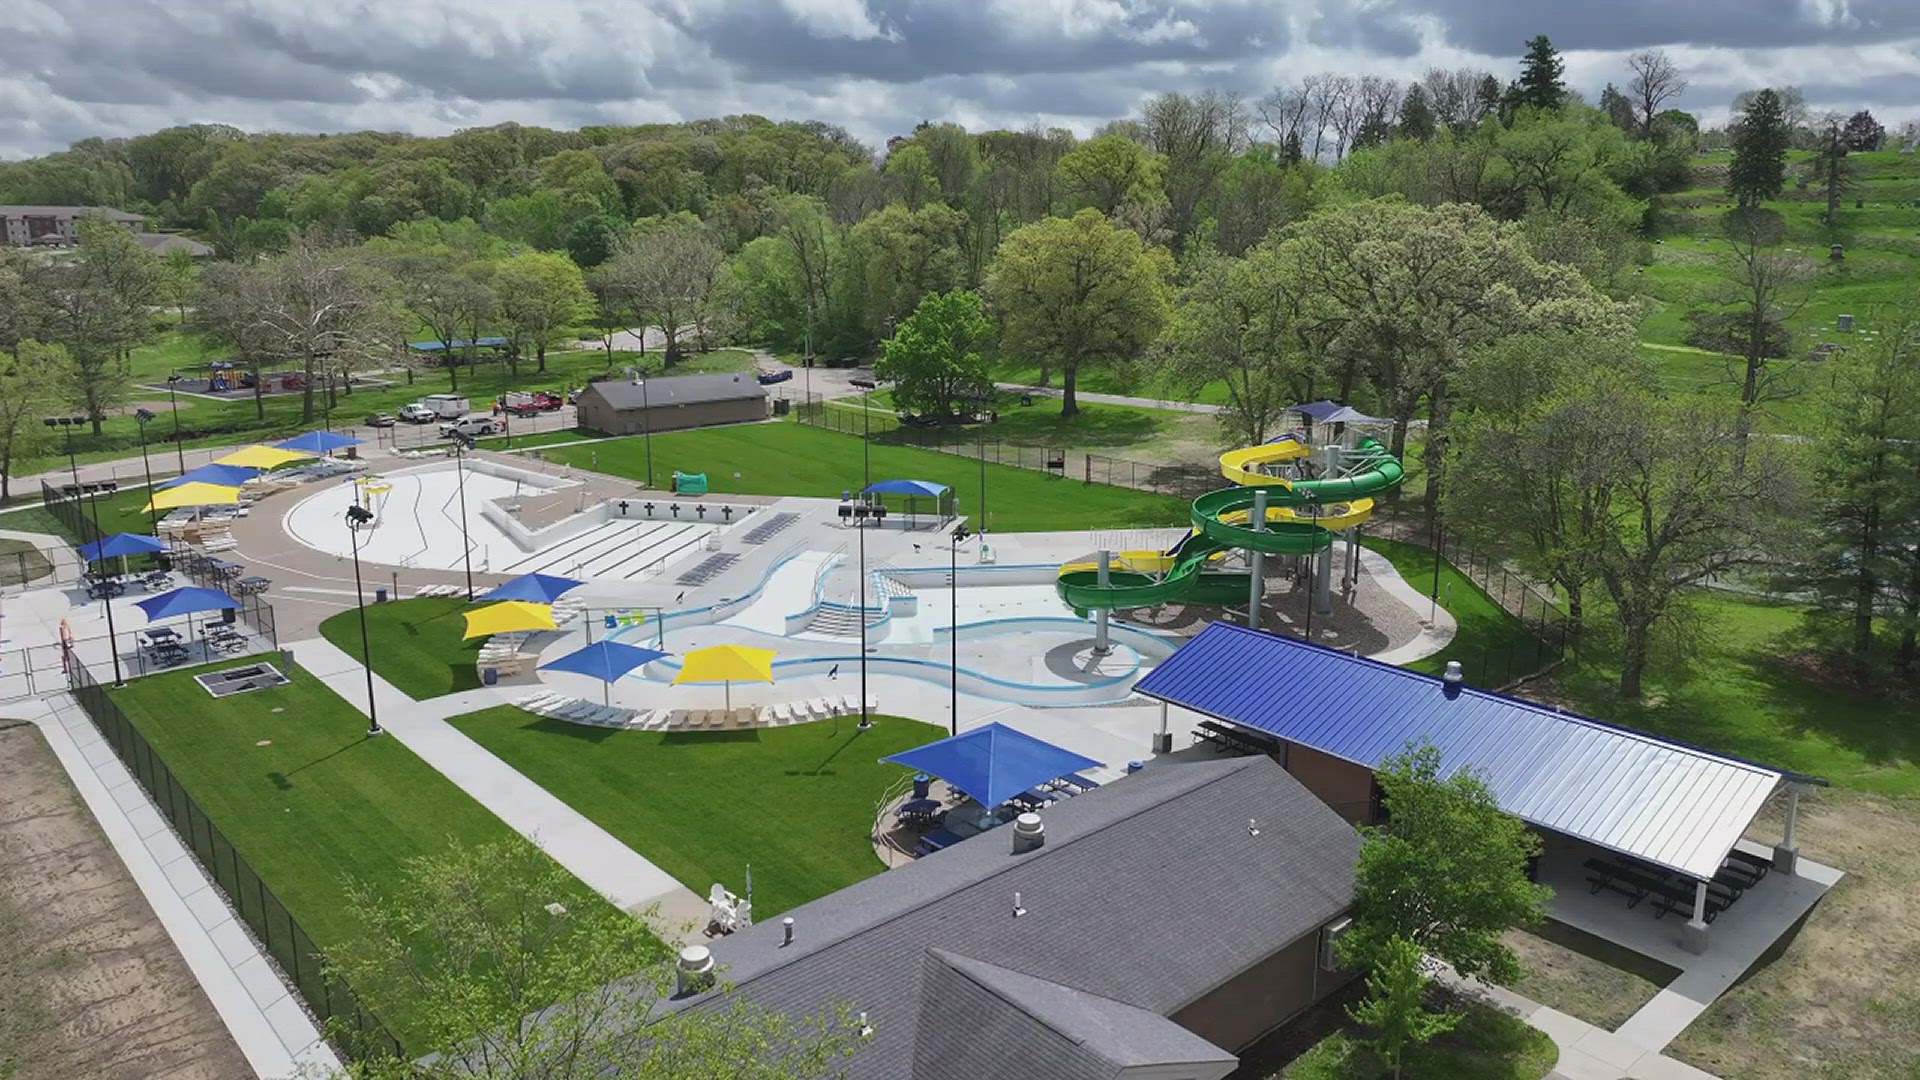 The park now features three new slides, a lazy river, a splash pad and more.